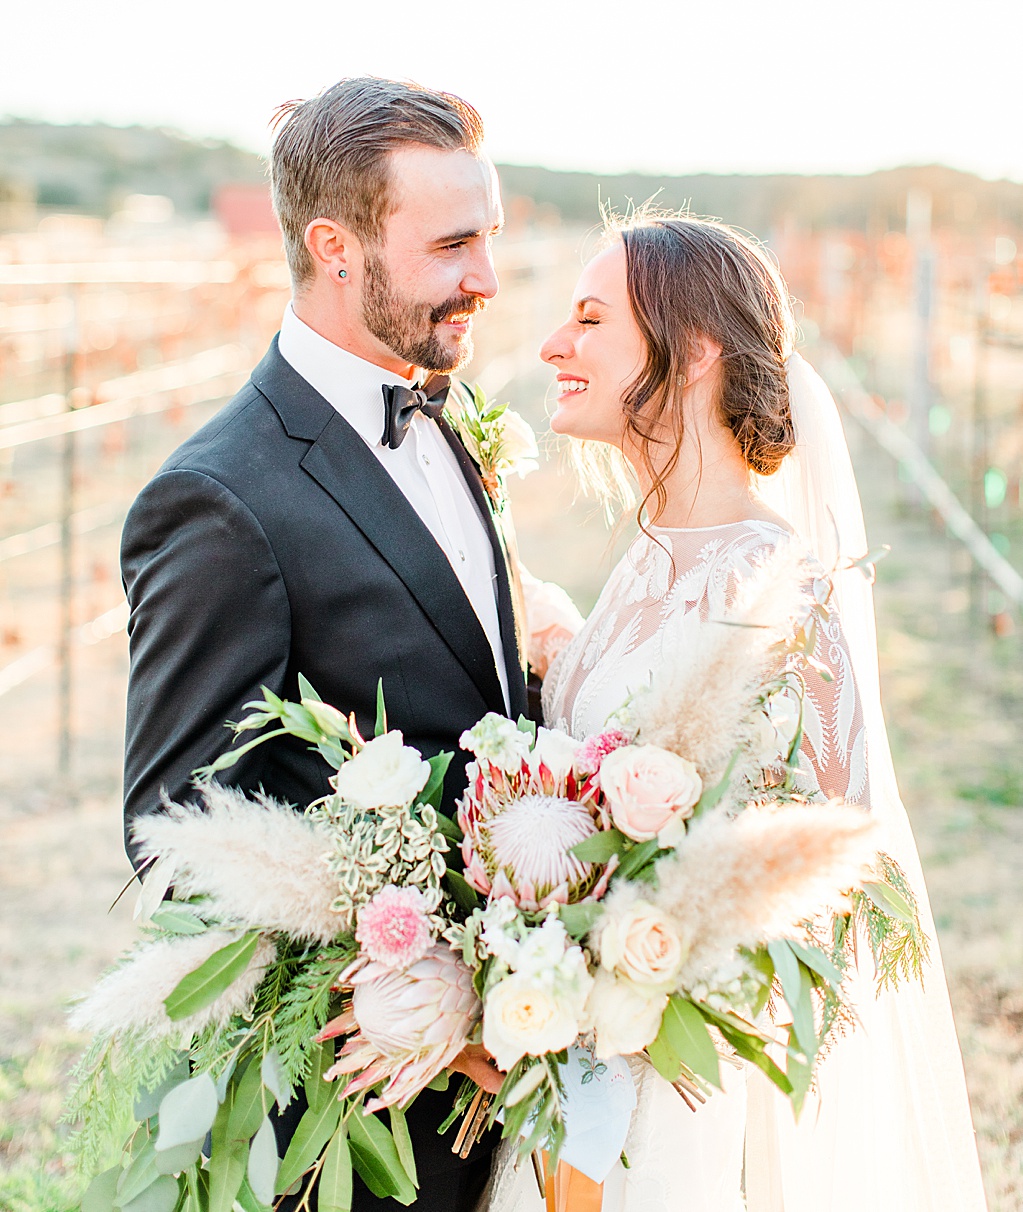 Hill Country Wedding at Turtle Creek Olive Grove wedding venue in Kerrville Texas by Wedding Photographer Allison Jeffers 0082